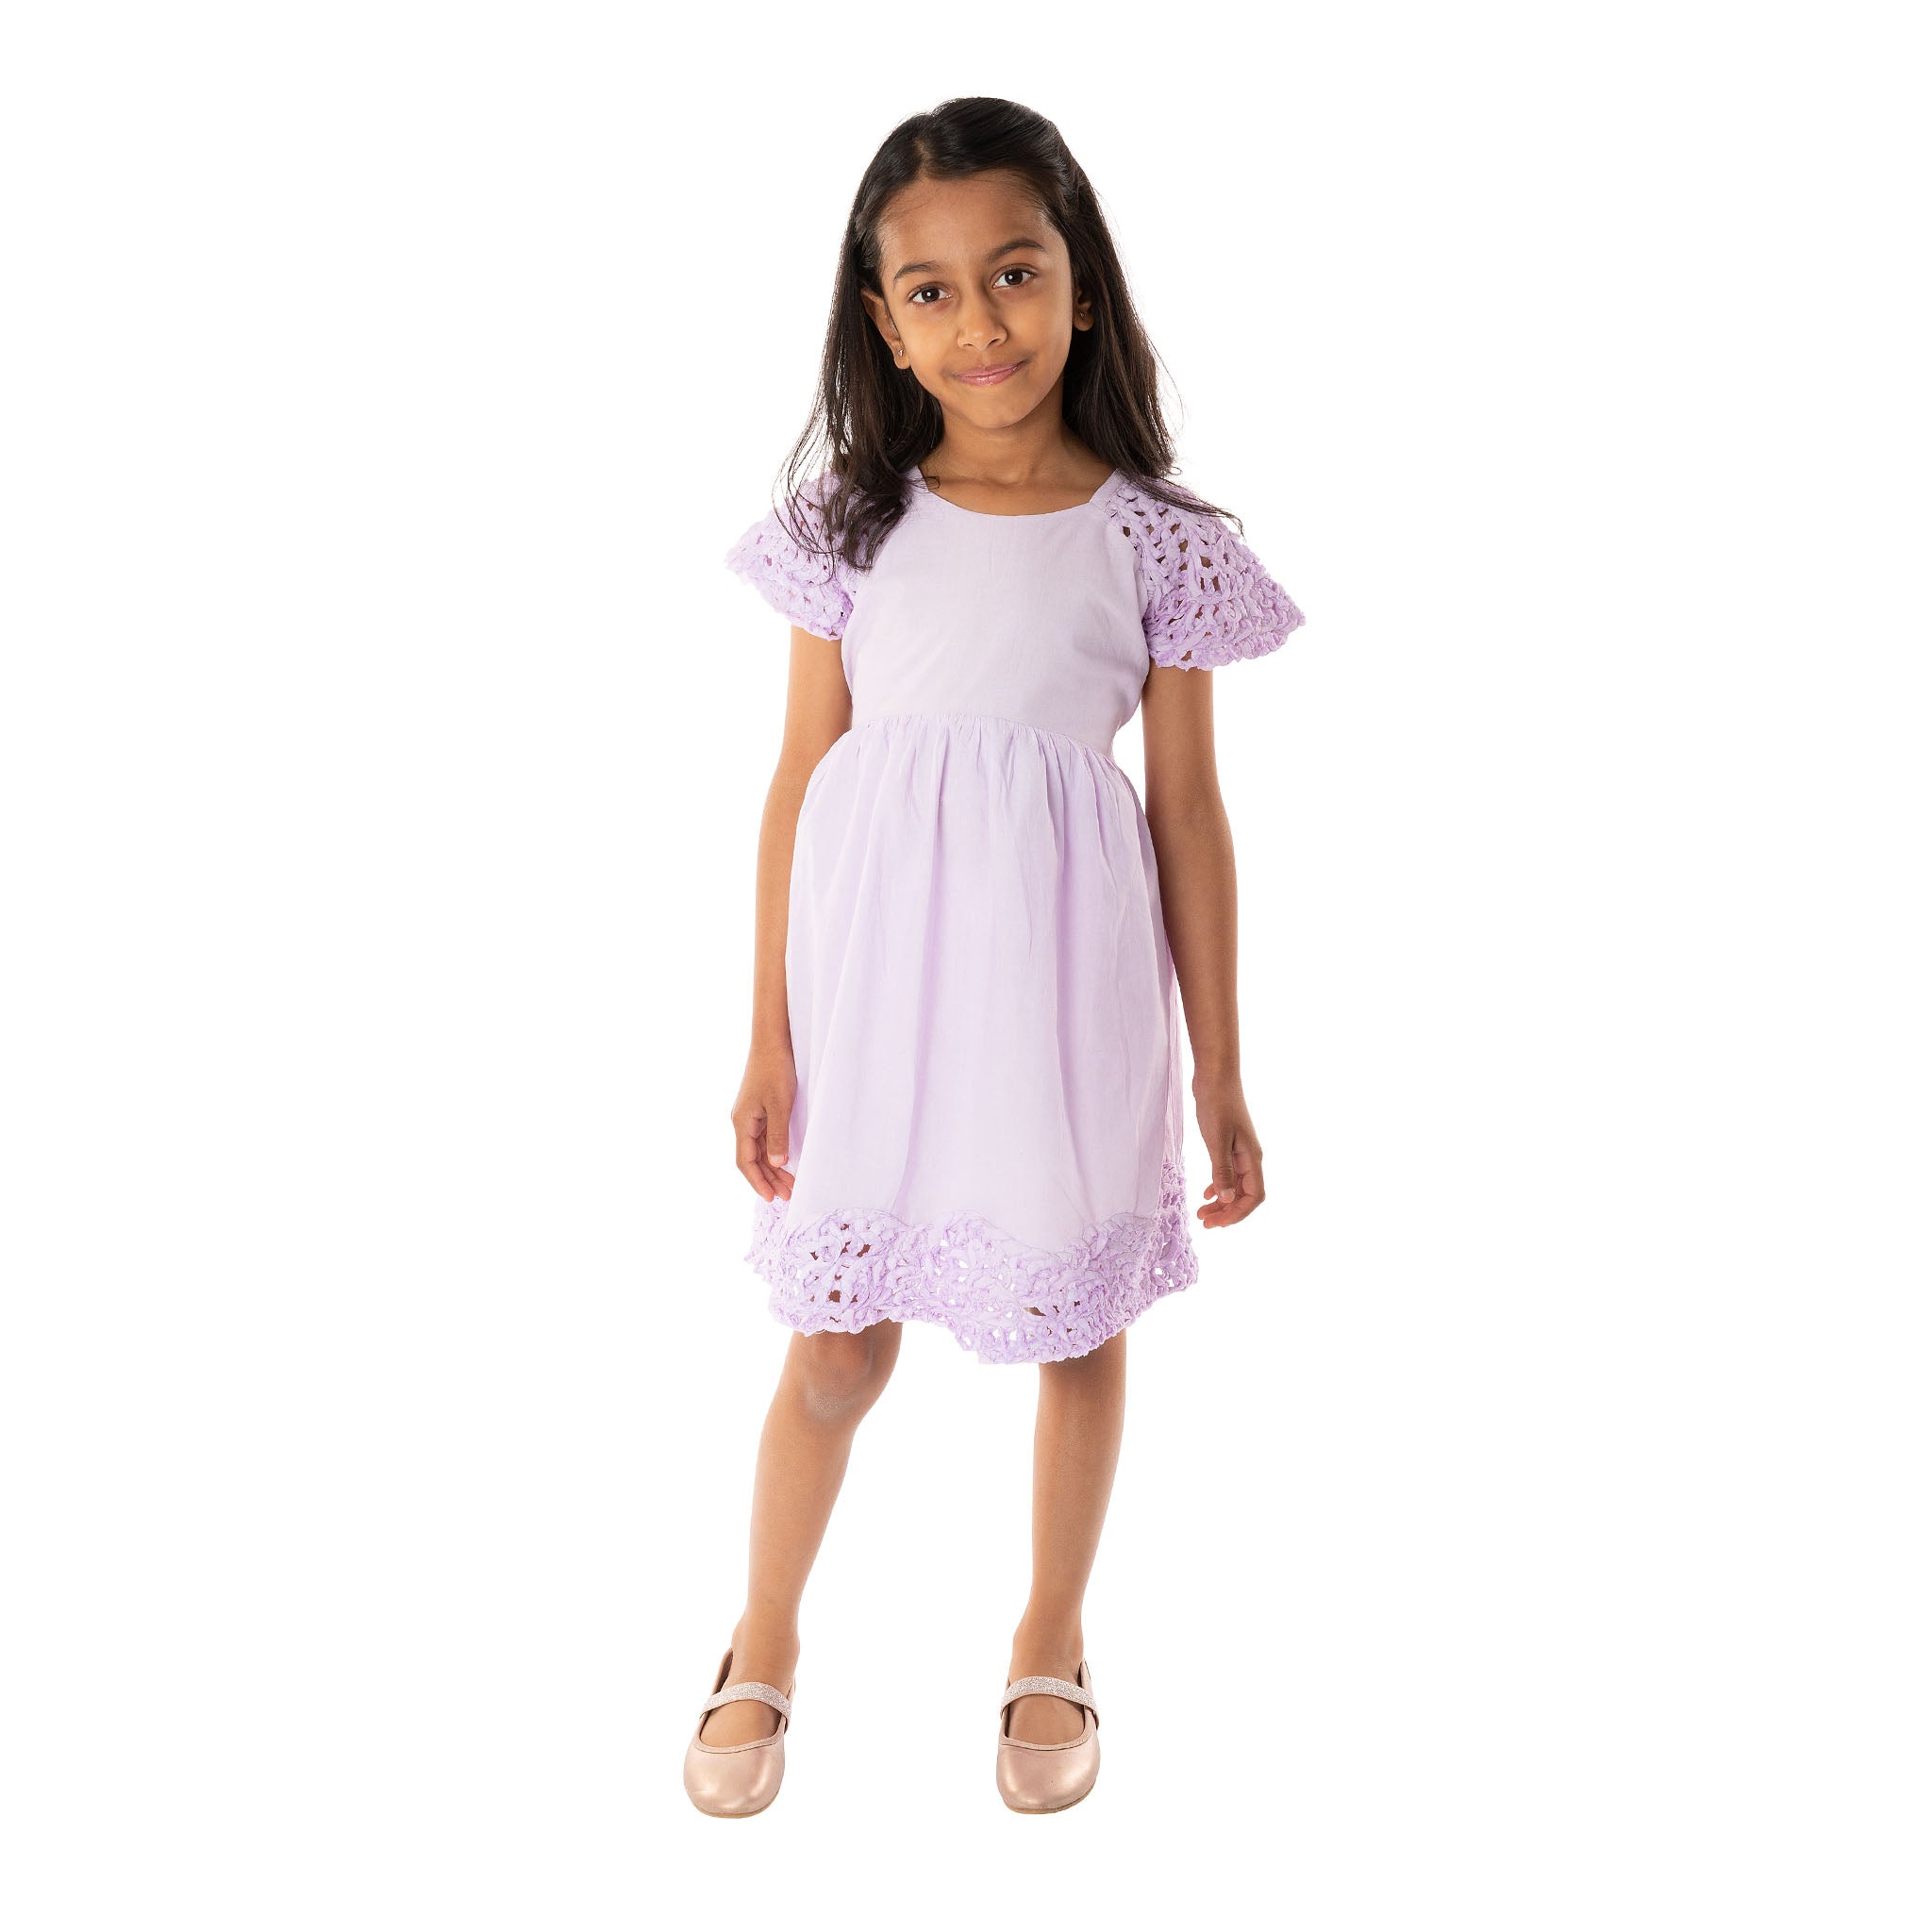 Buy BiBiblack Girls Princess Costume Dress up Trunk for Kids Ages 3-6 Years  (3-6 Years- Girls Dress up Trunk) Pink Online at Low Prices in India -  Amazon.in